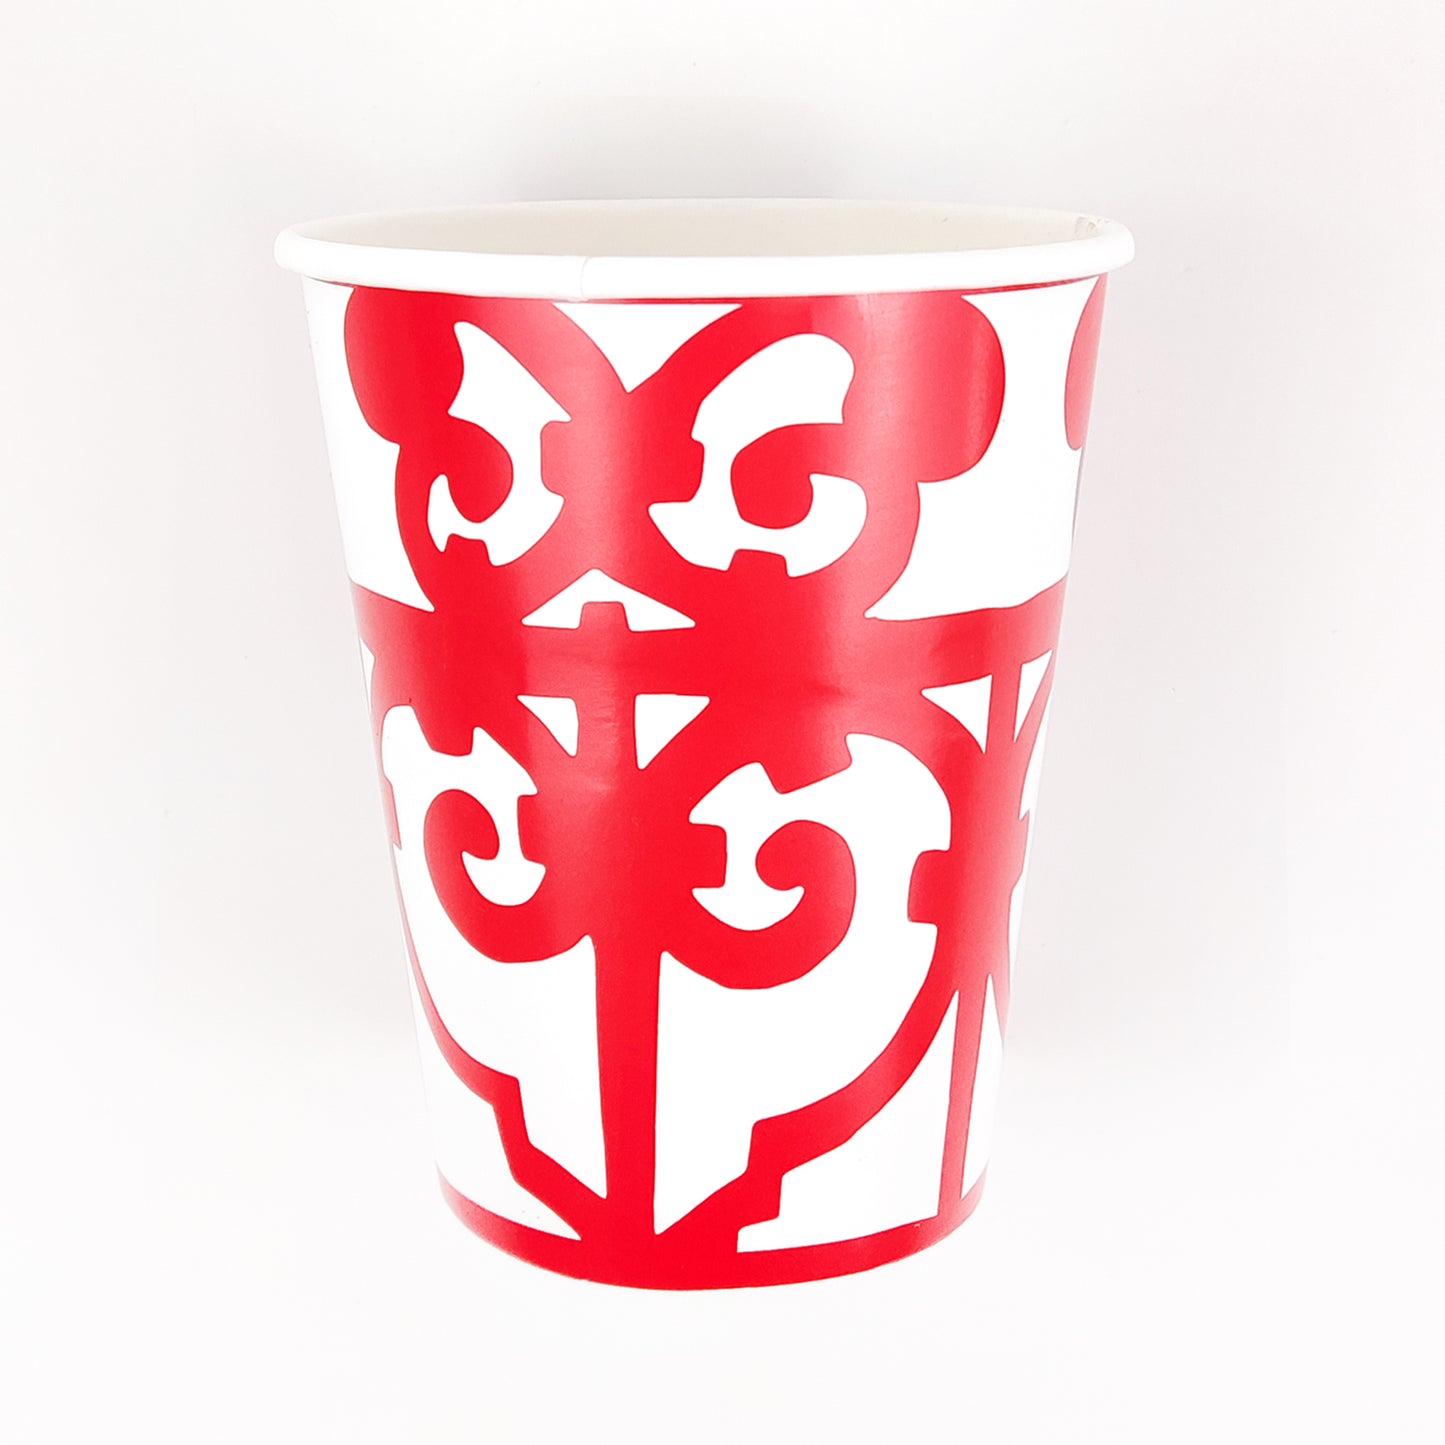 Chinese New Year Window Paper-cut Design Compostable Party Tableware Paper Plate Cup Napkins